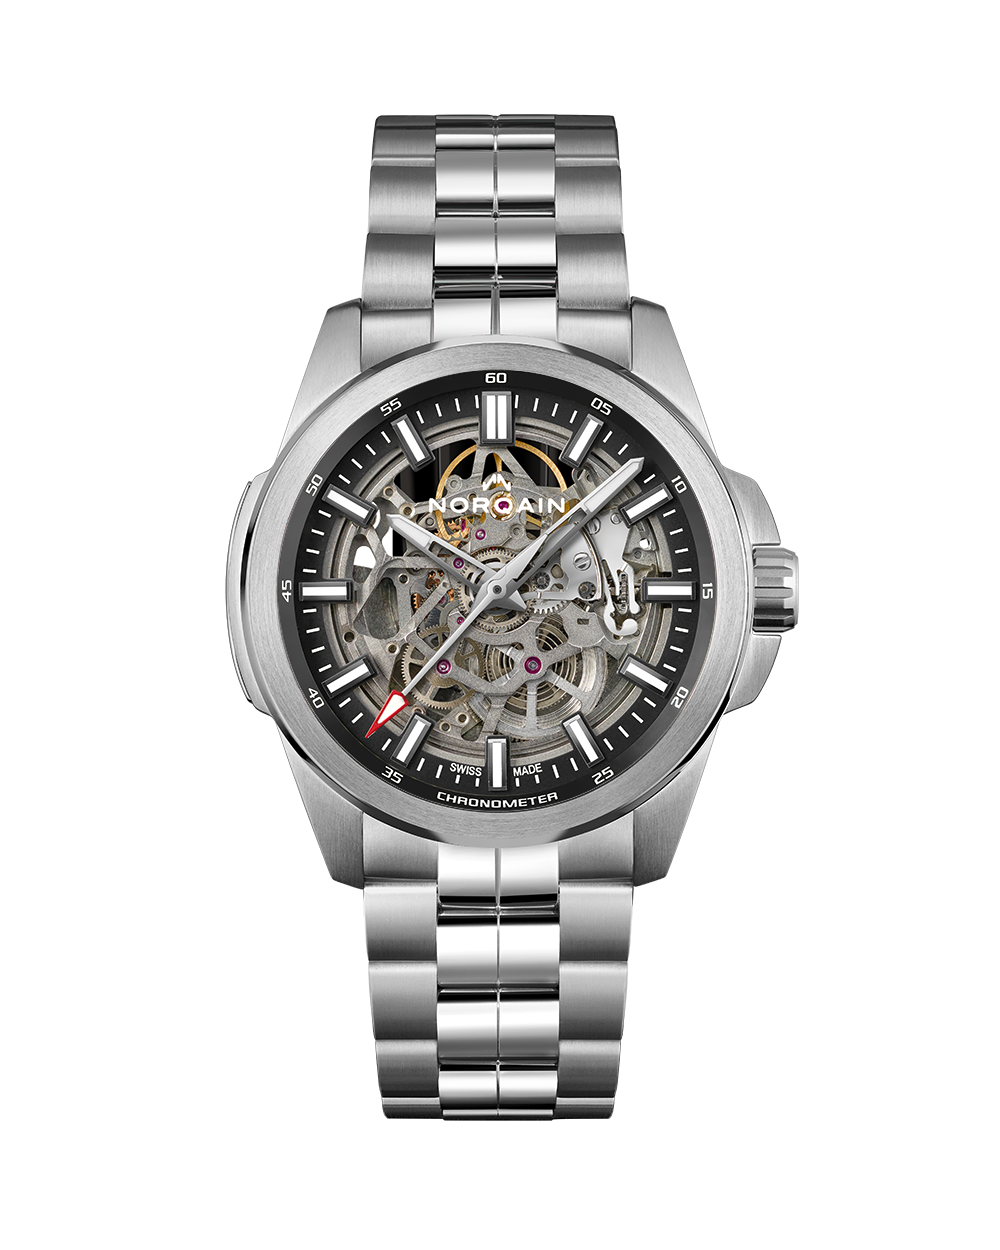 INDEPENDENCE 22 SKELETON 42MM SPECIAL EDITION